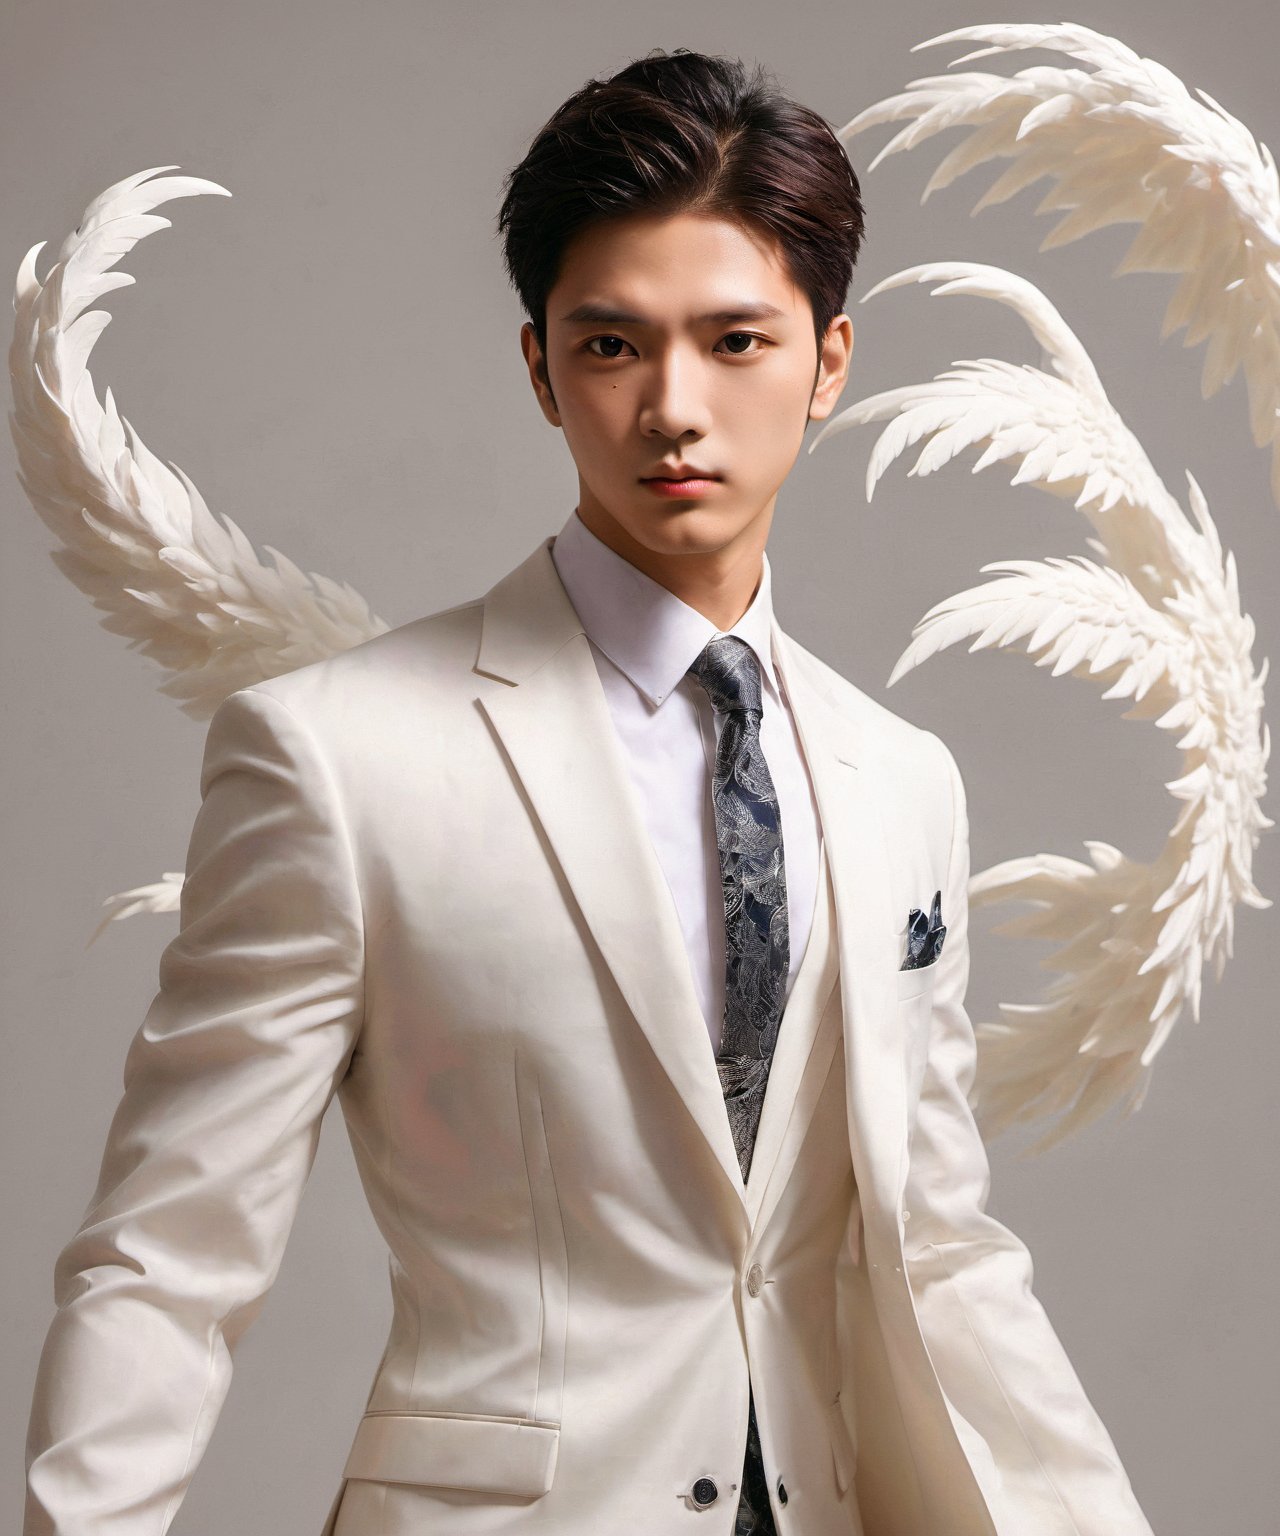 Create an image of a young man wearing a suit, featuring vibrant, beauty giant wings extending from his back. Random movement The background should be plain white, emphasizing the contrast and detailing of the beauty wings and the sharpness of the suit. The man should appear poised and elegant, with the wings unfurled to showcase a spectrum of vivid hues, blending seamlessly from one color to another. The focus should be on the meticulous details of the wings’ feathers and the suit’s fabric, capturing a harmonious blend of natural and refined elements, wings,Stylish, close up,l3min,wings,xxmixgirl